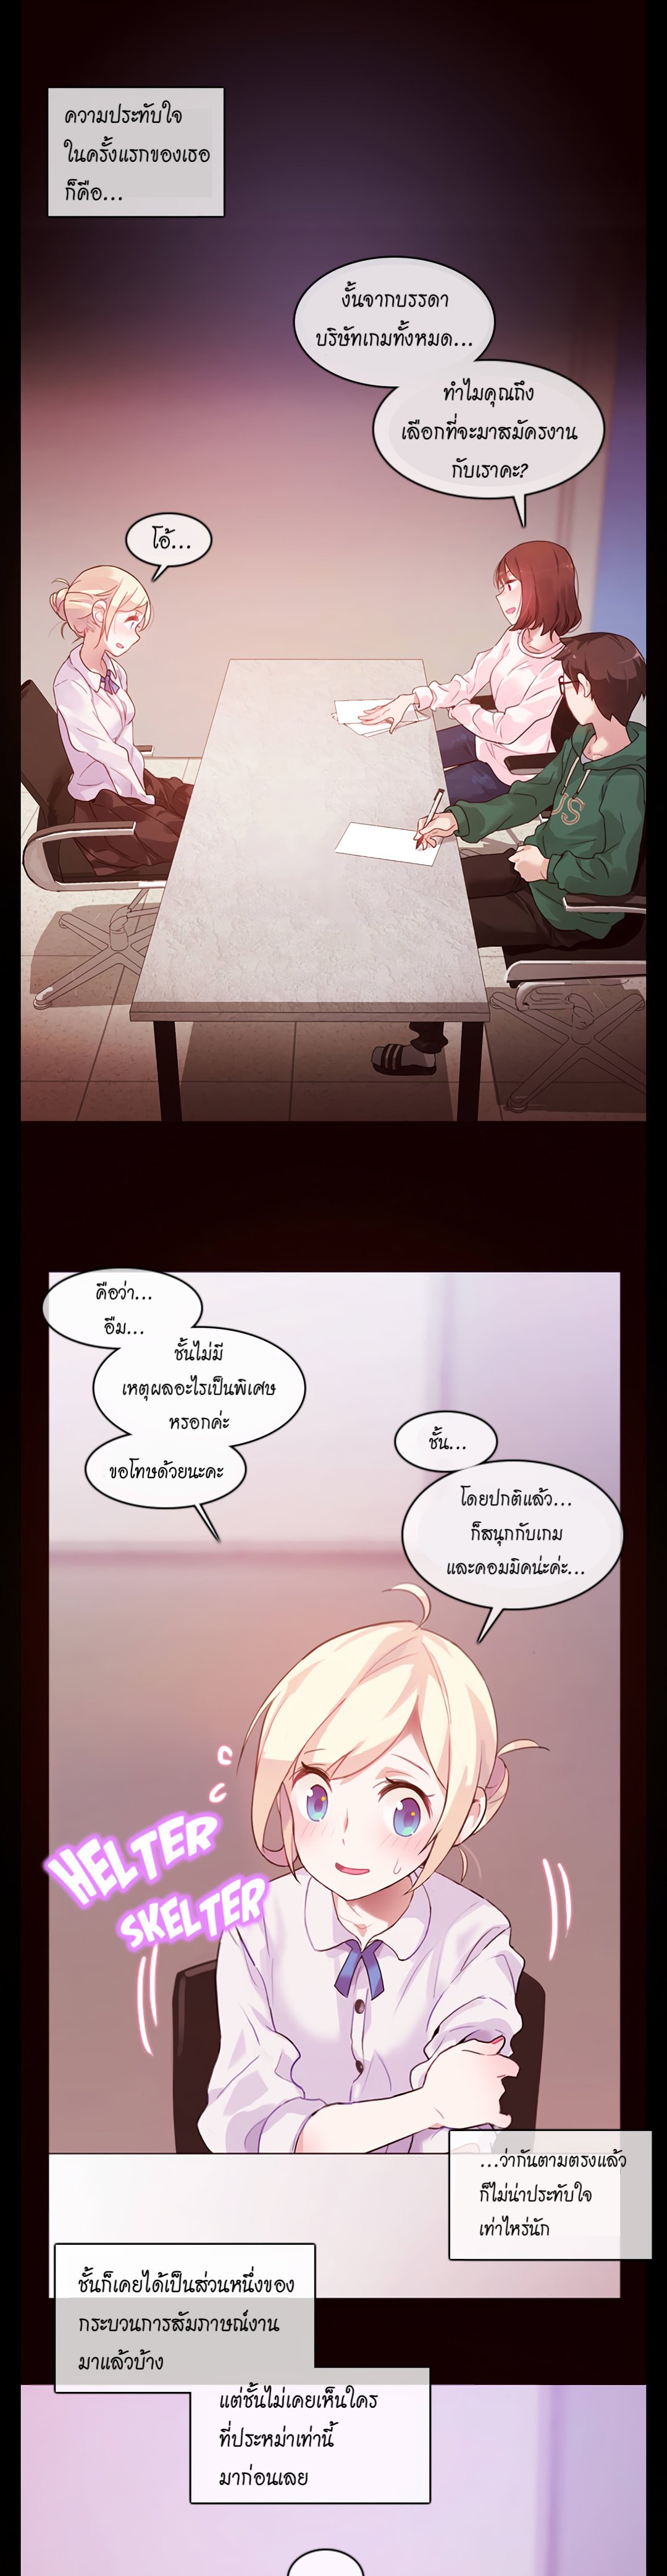 A Pervert’s Daily Life 1 (9)